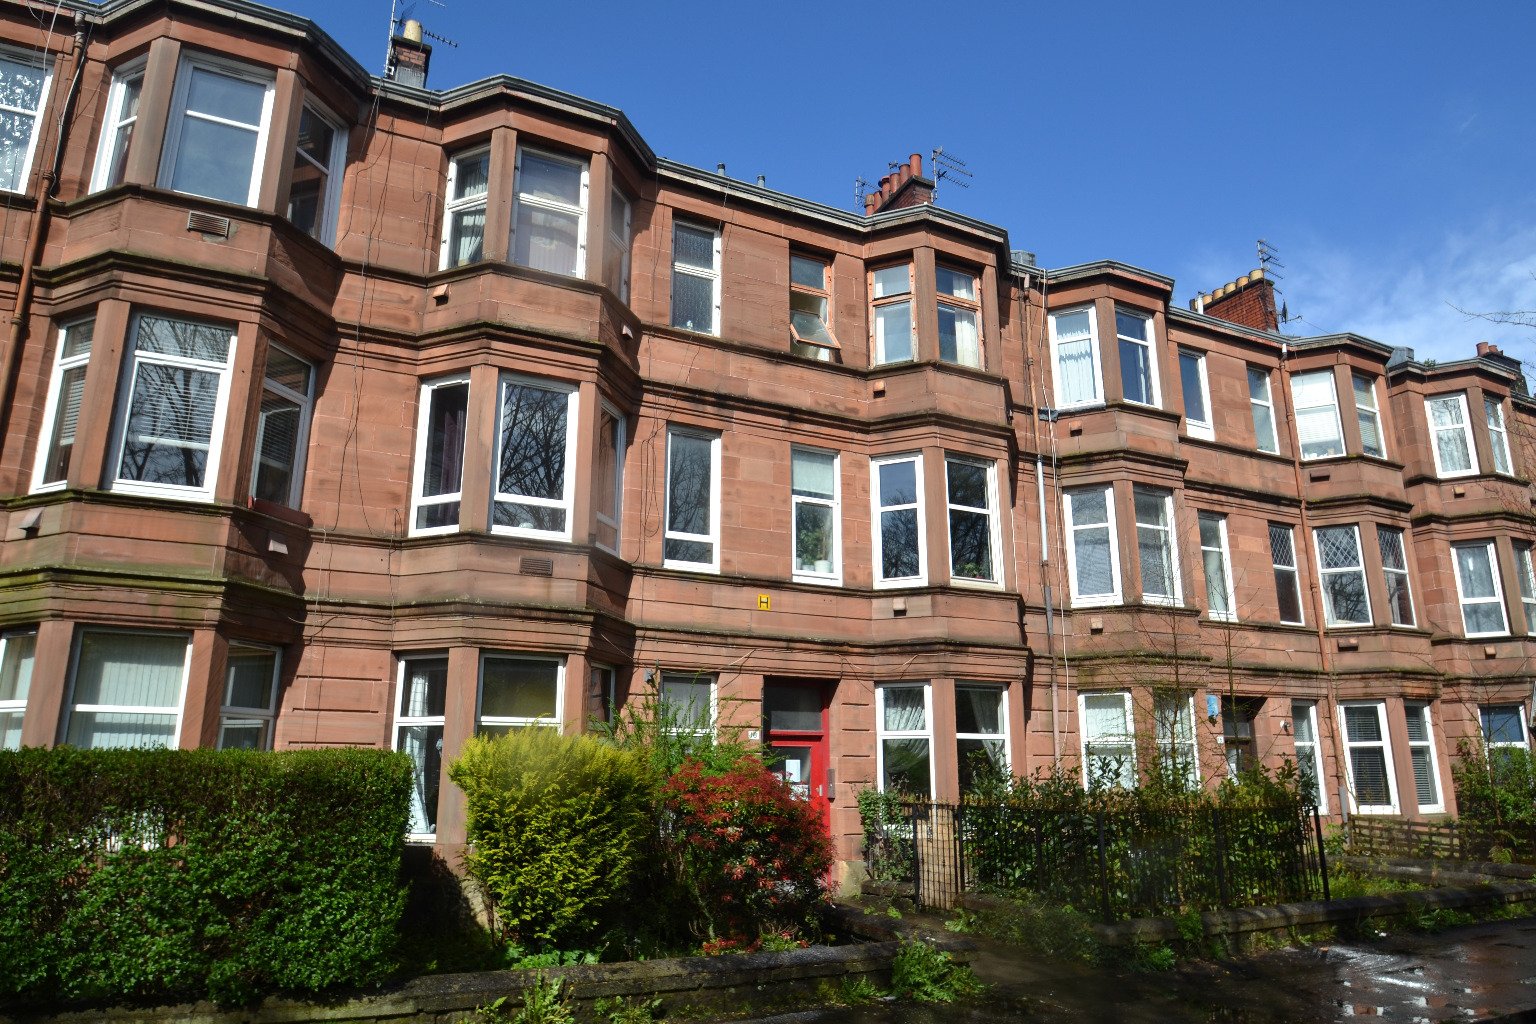 1 bed flat for sale in Clifford Street, Glasgow - Property Image 1